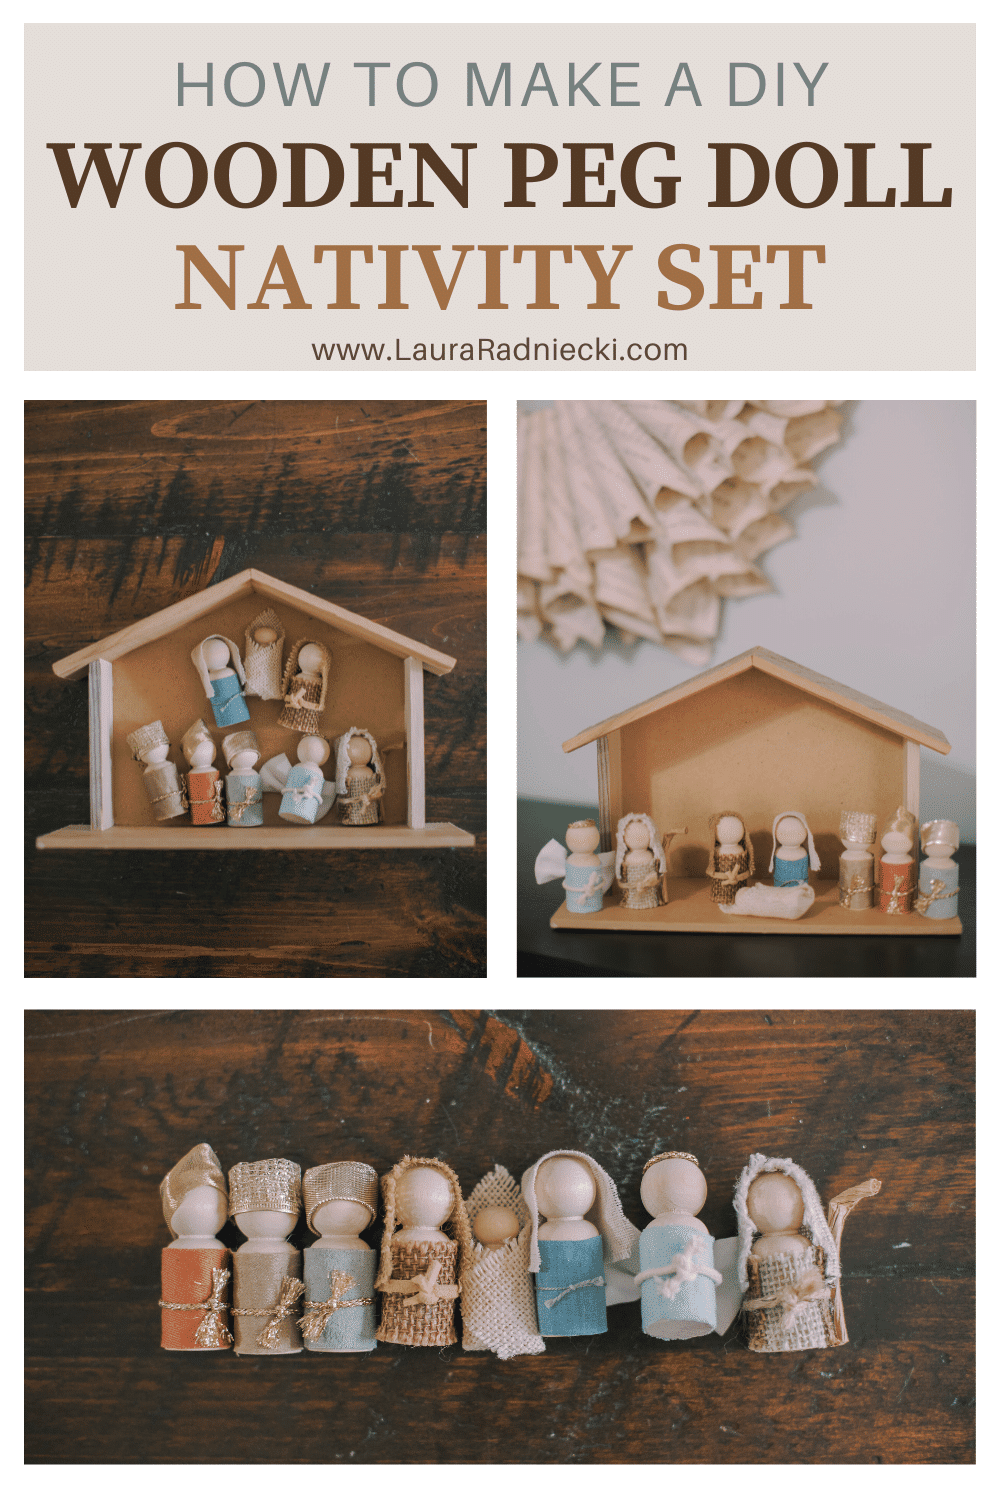 How to Make a Wooden Peg Doll Nativity Set